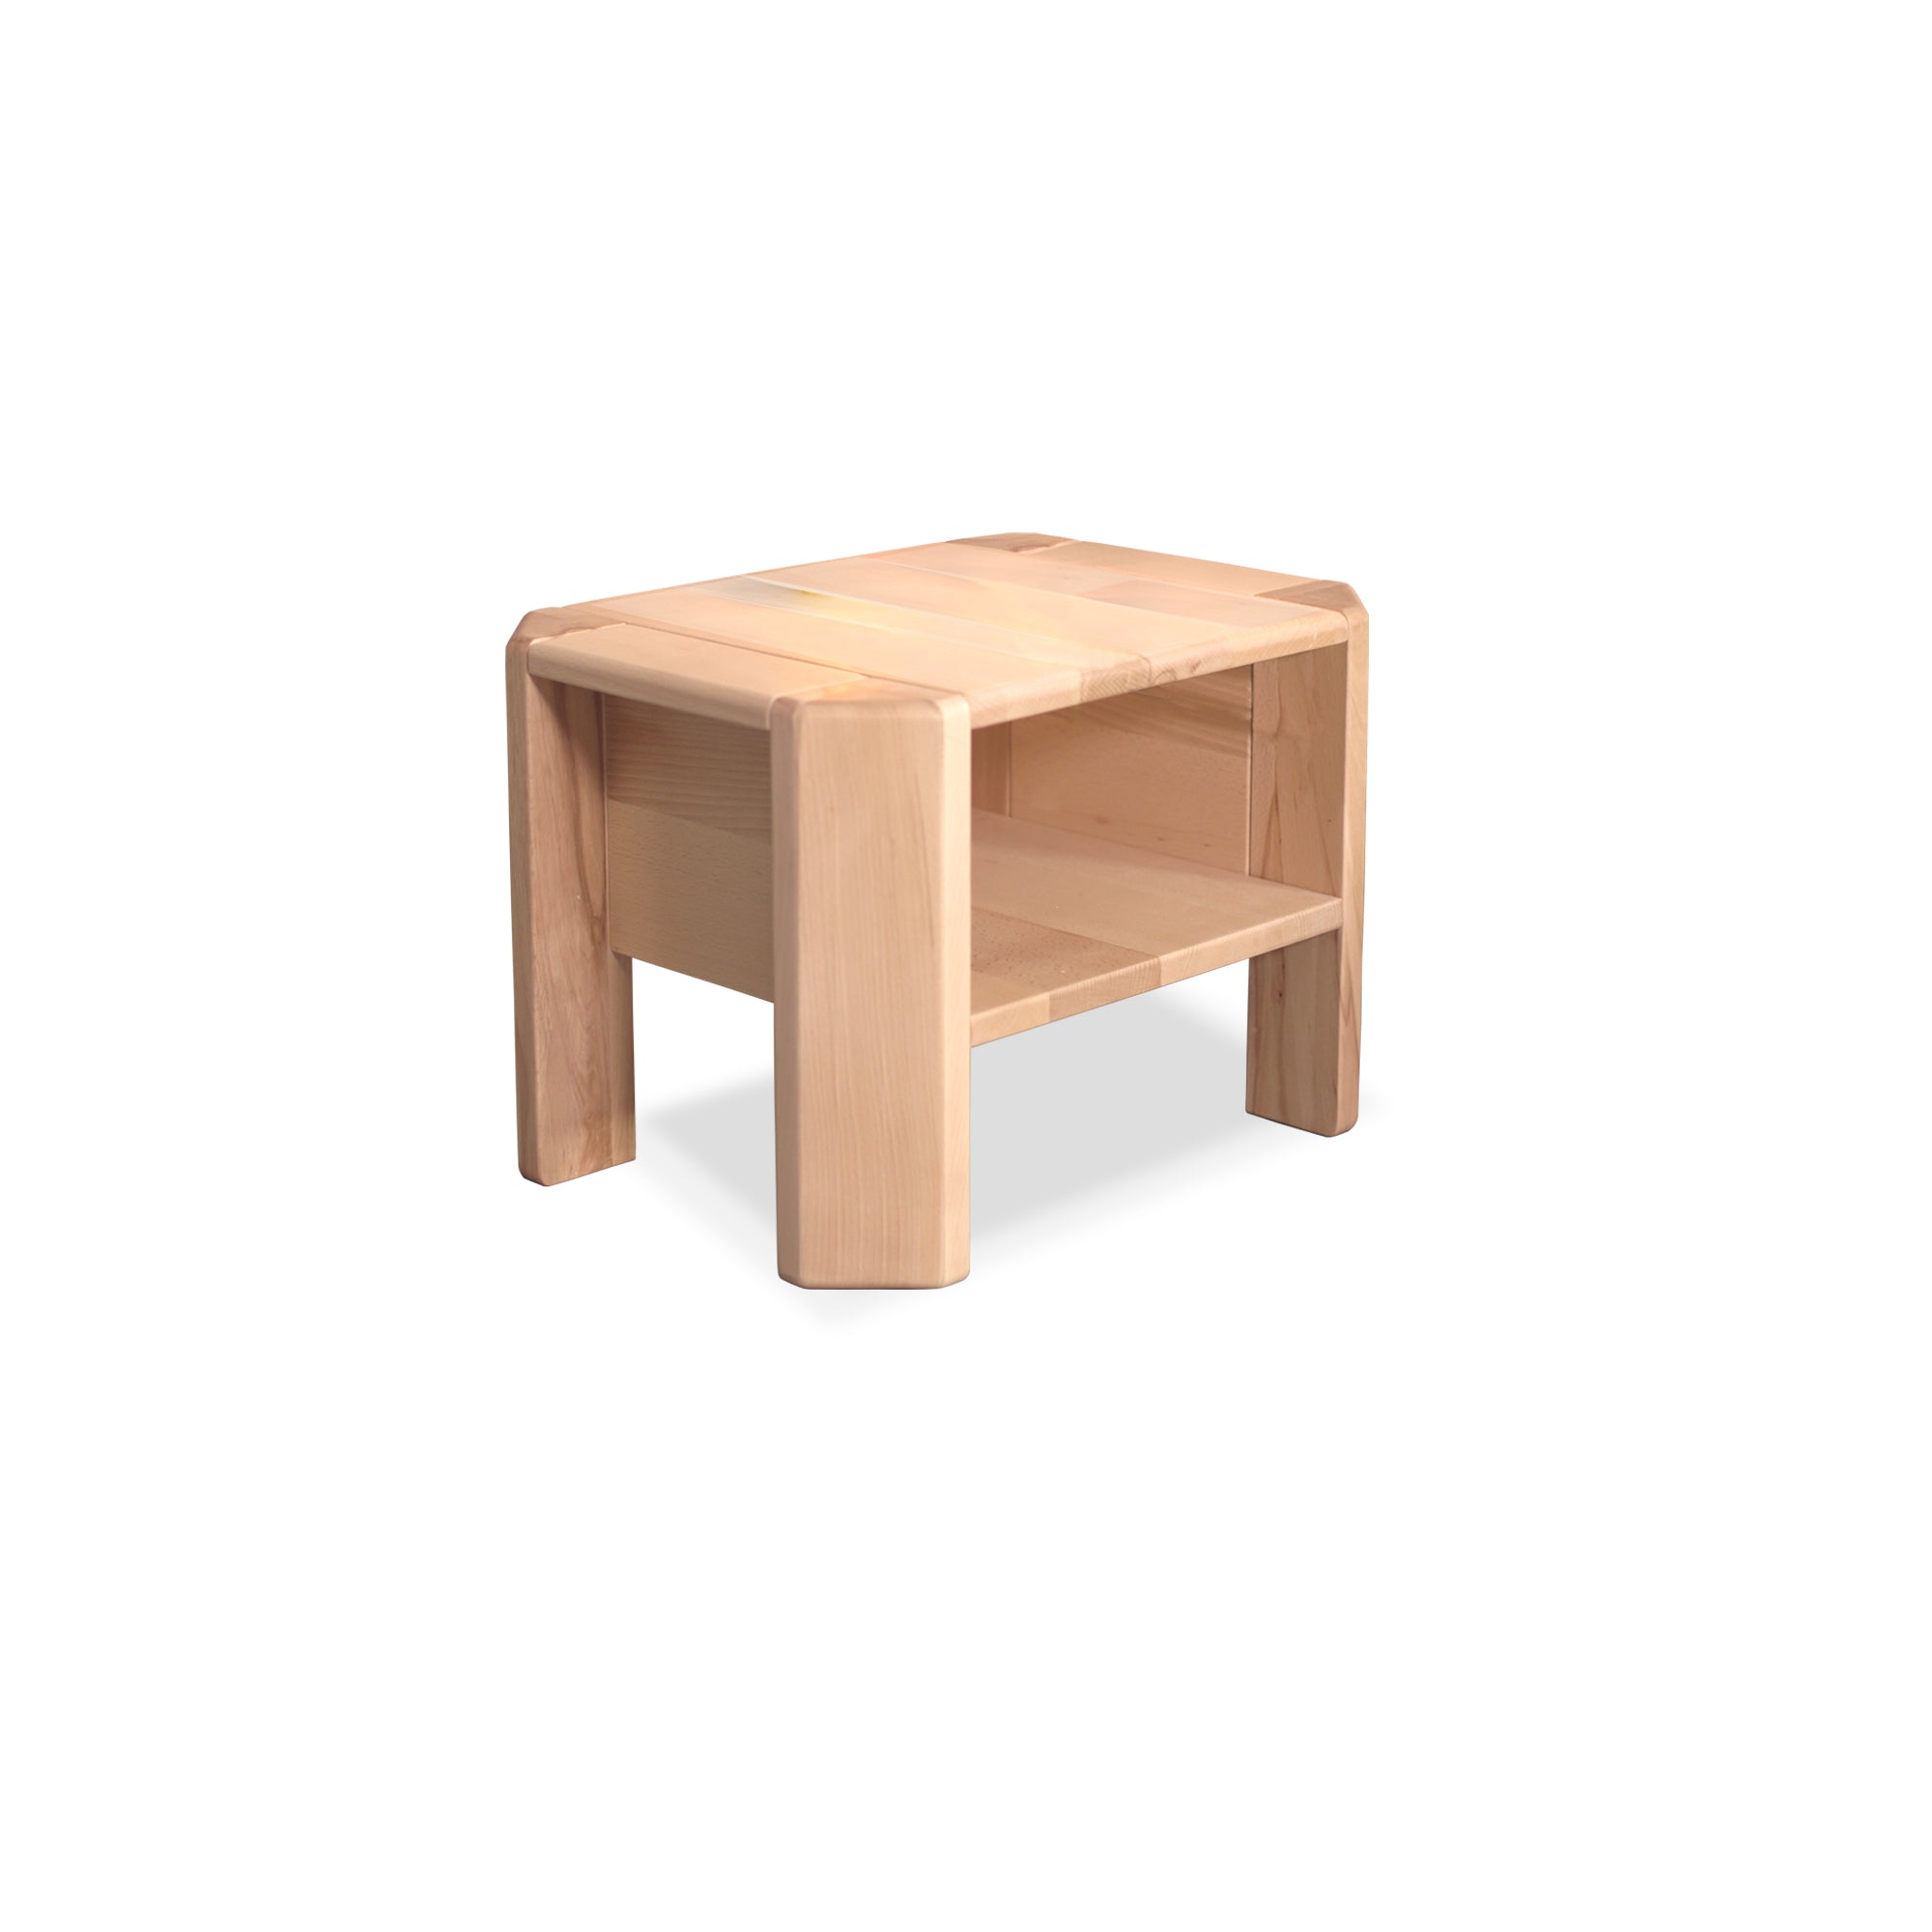 LOFT Bedside Table, Beech Wood-natural colour-without doors white background